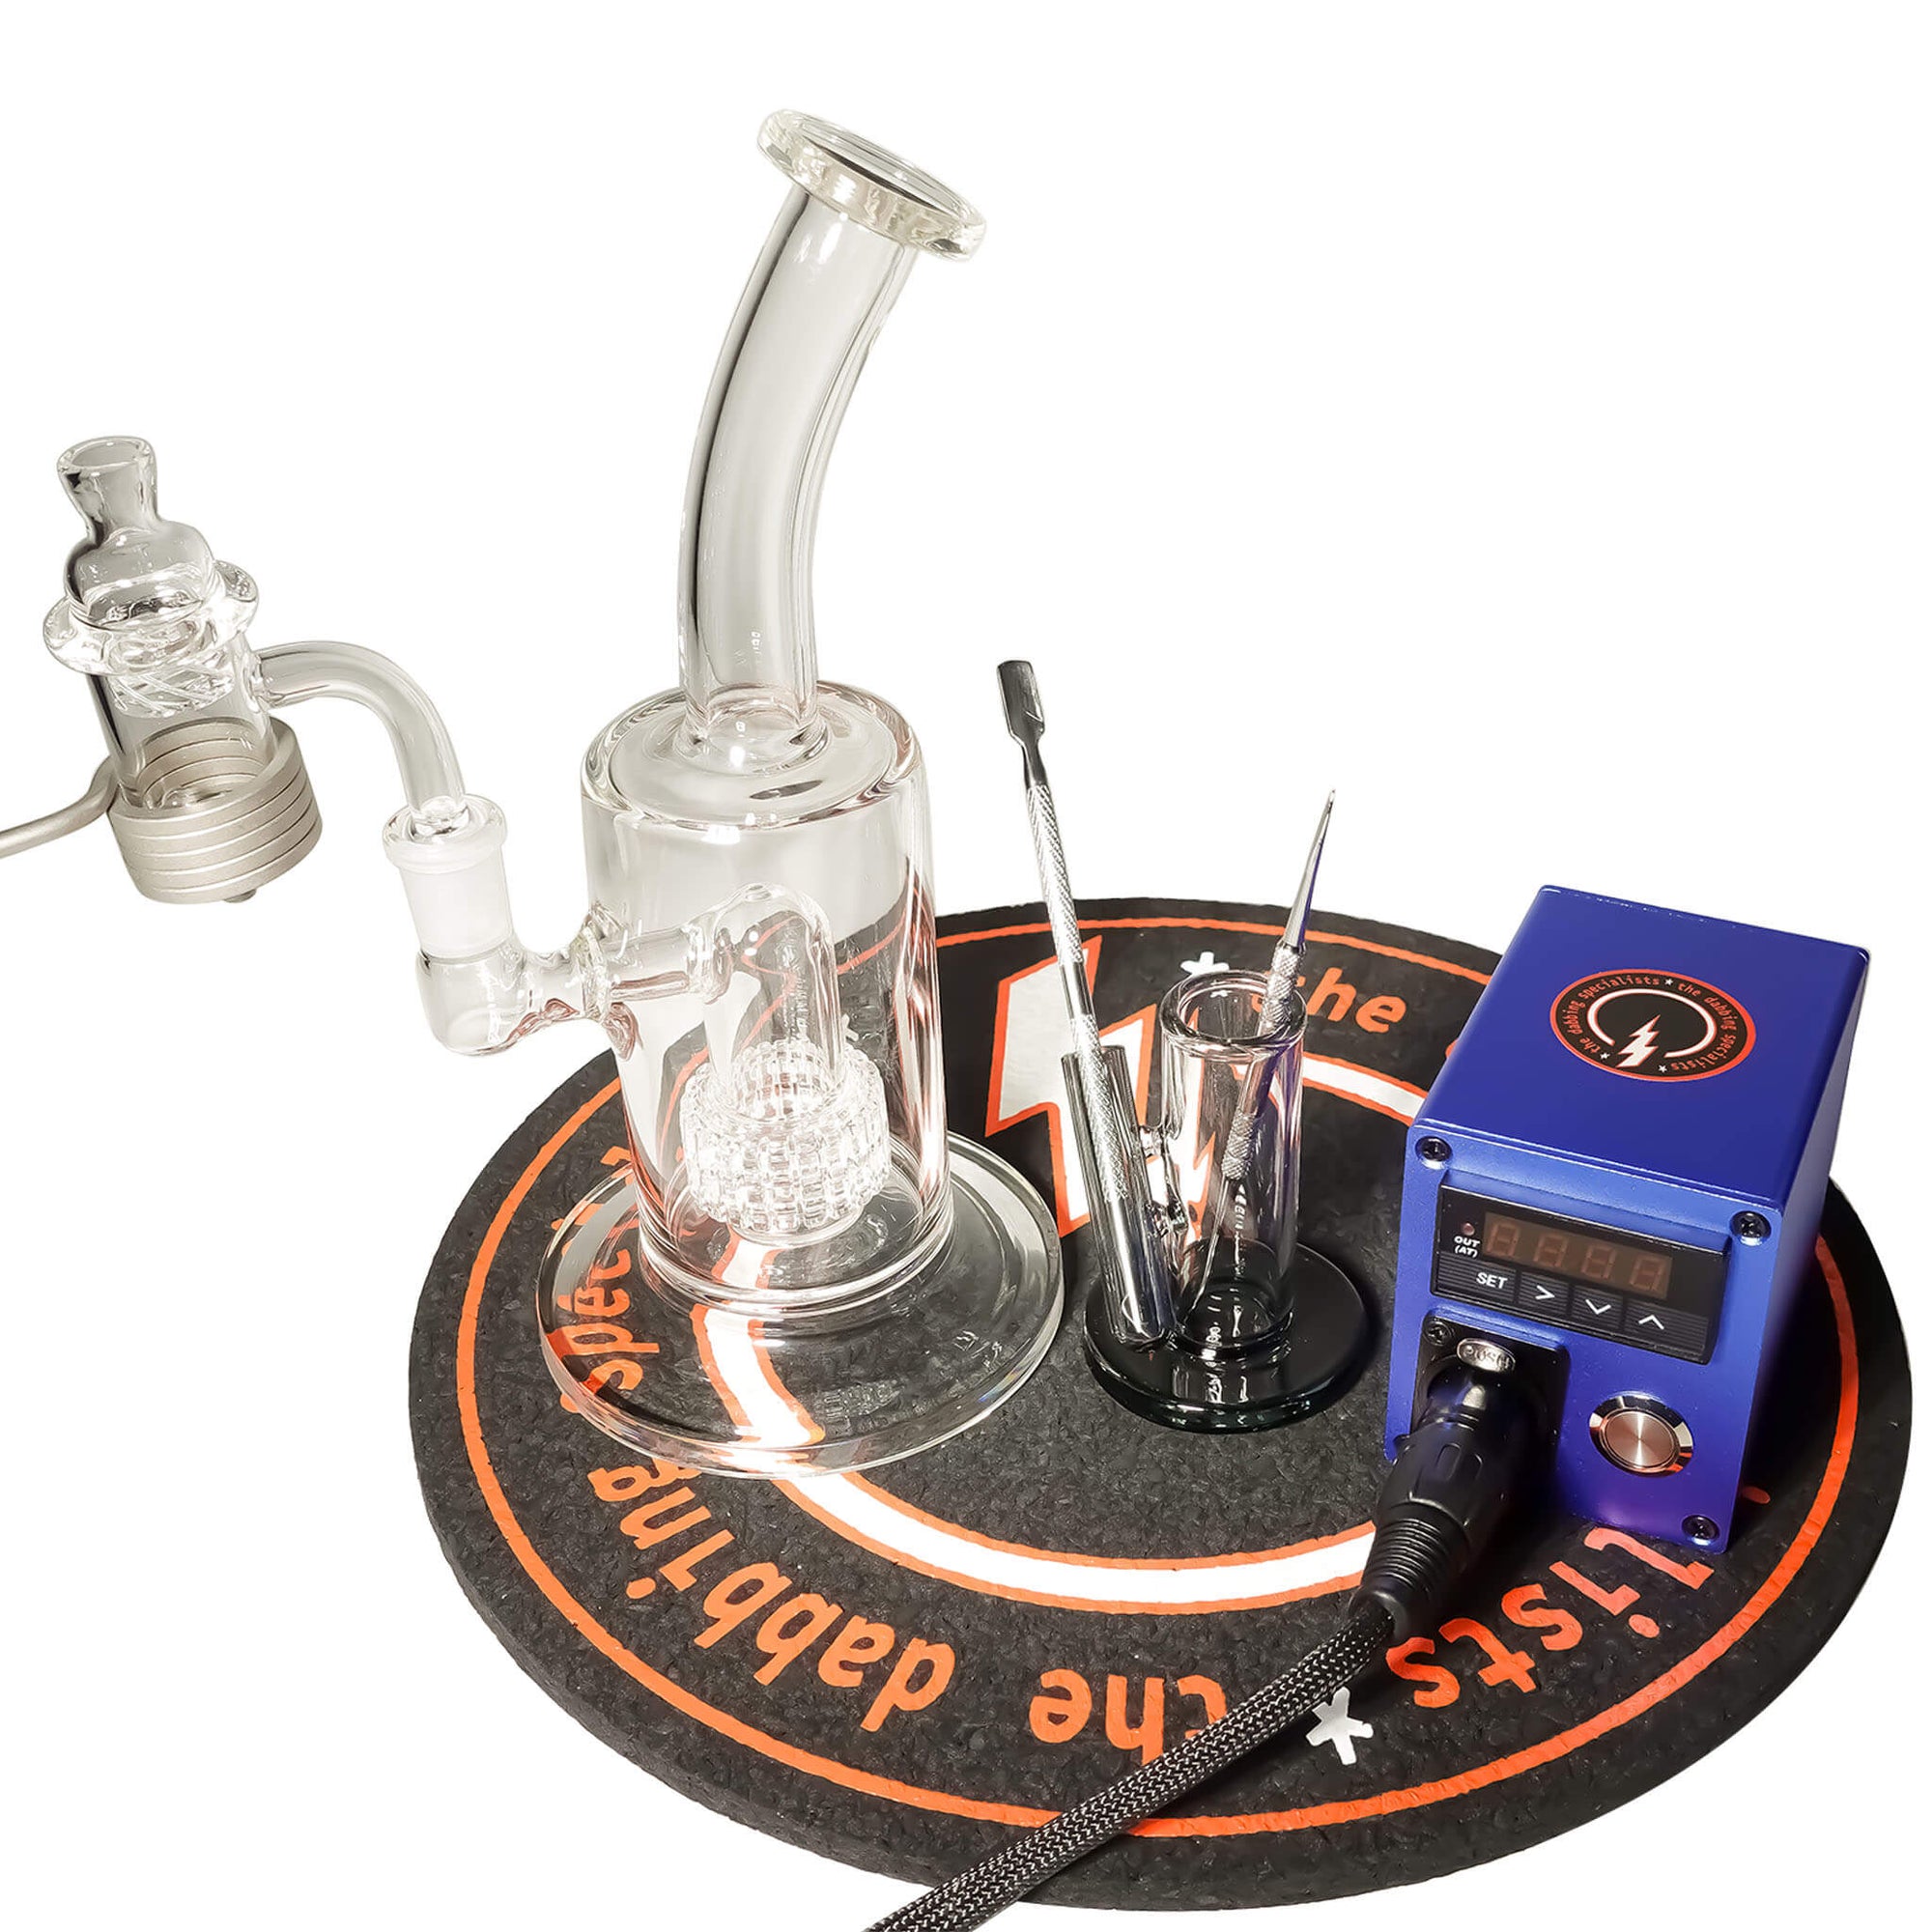 Commander 25mm E-Banger Deluxe Enail Kit | Blue Kit View | the dabbing specialists